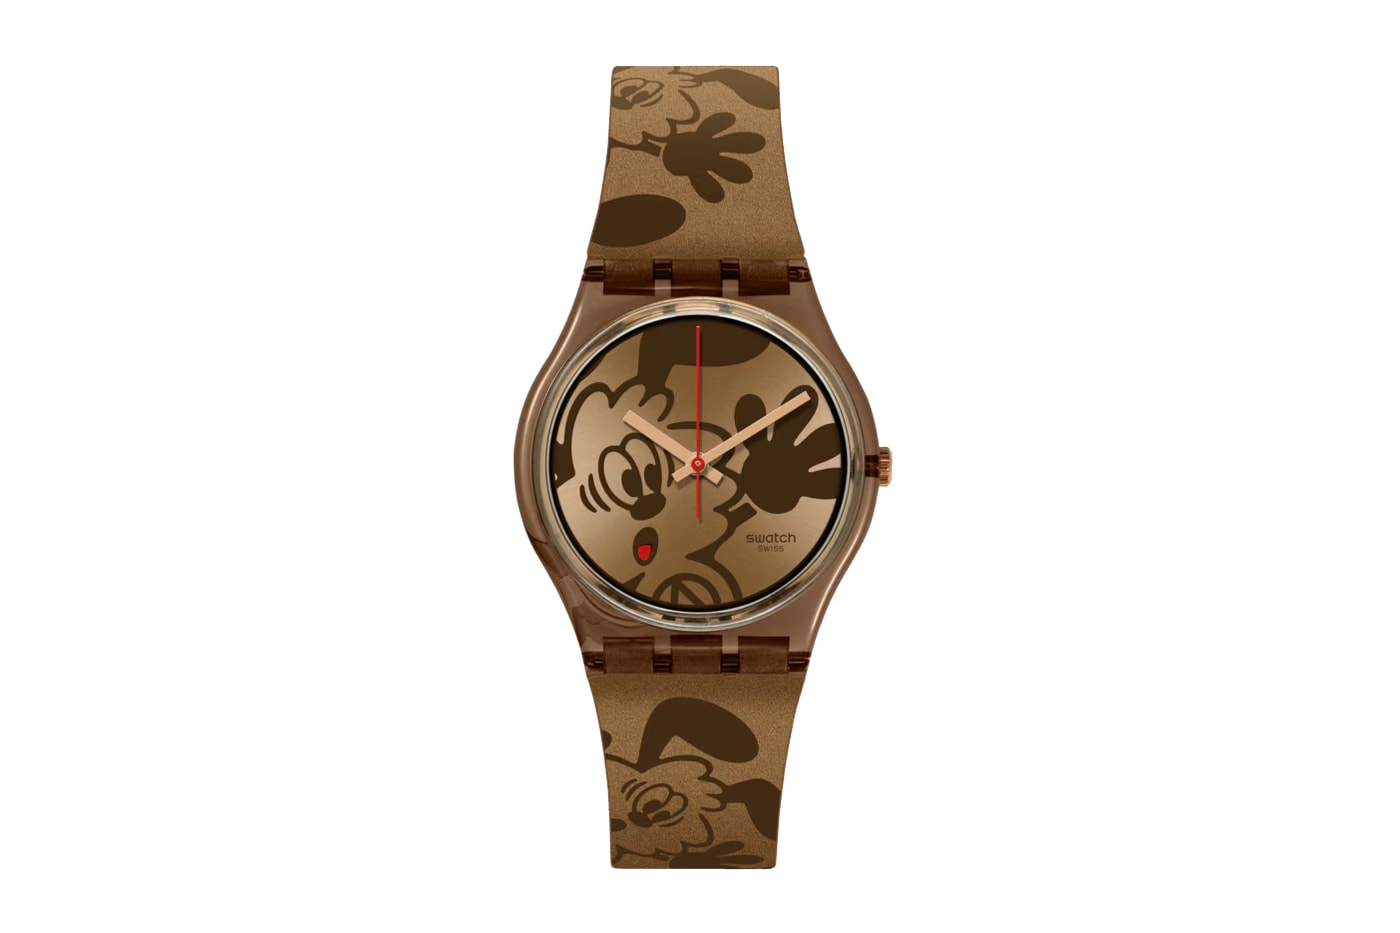 Swatch VICK BRONZE BY VERDY Collaboration Biennale Edition Release Info